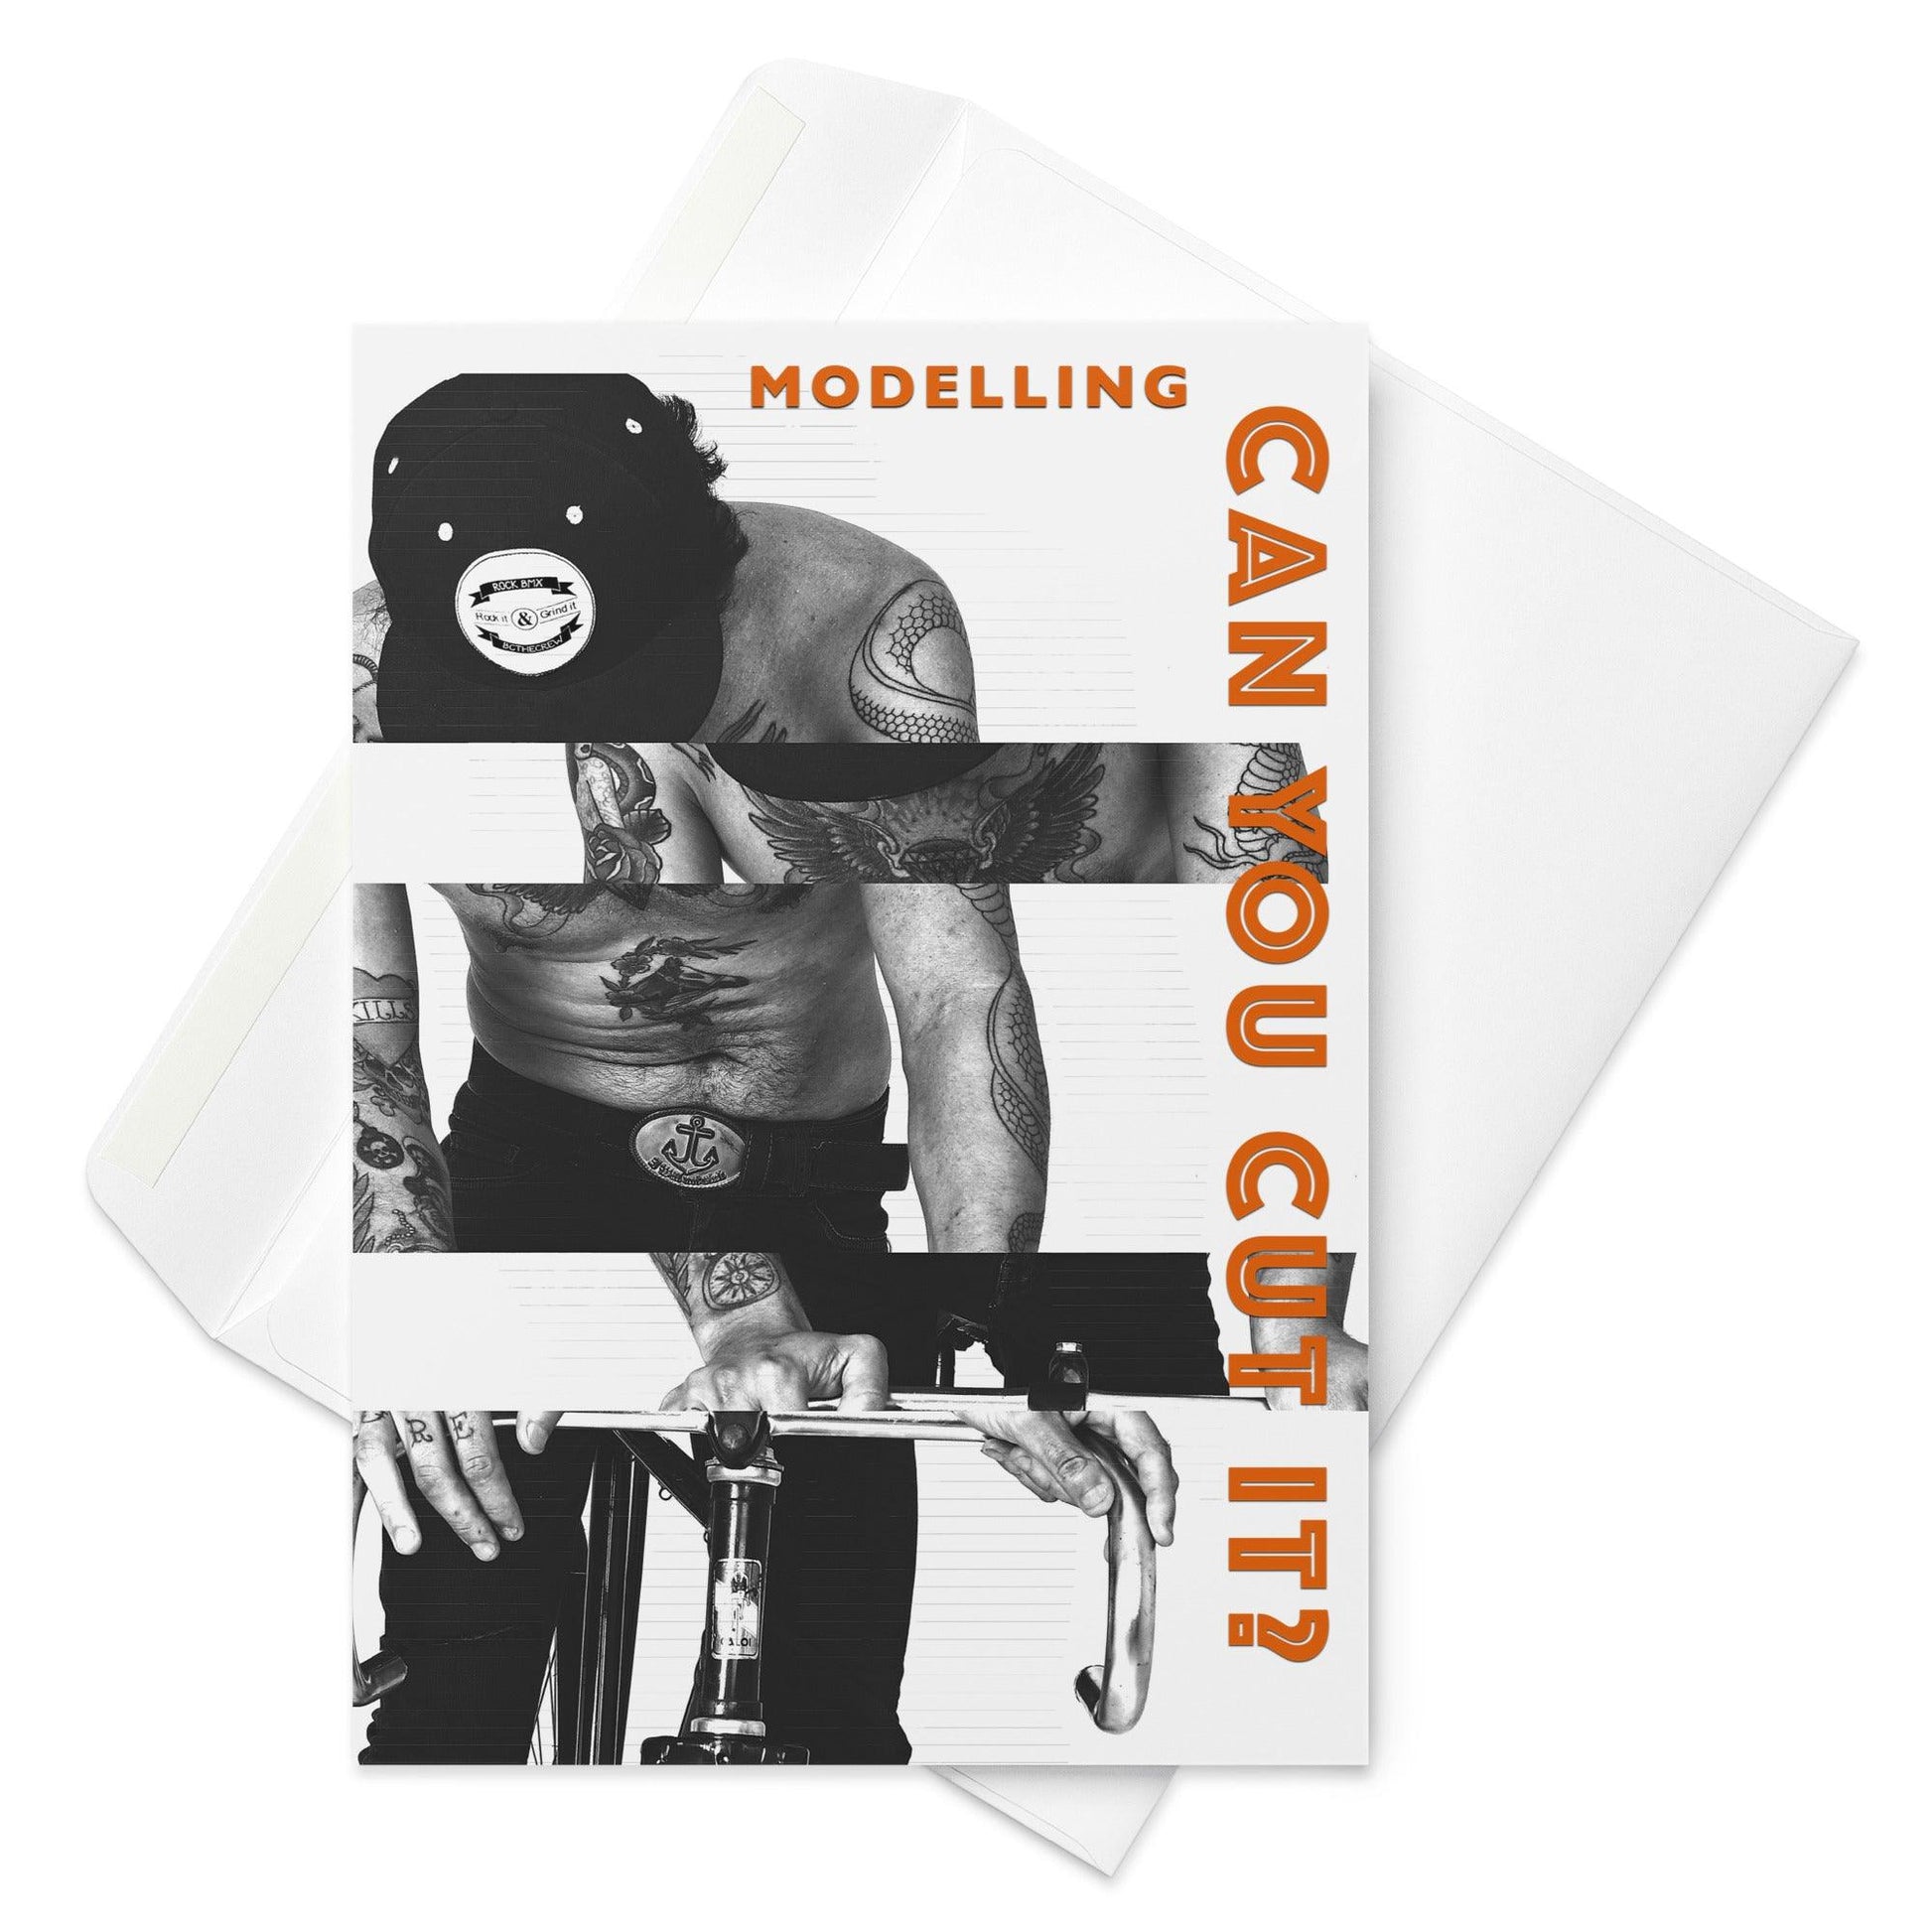 Modelling Can You Cut It - Note Card - iSAW Company